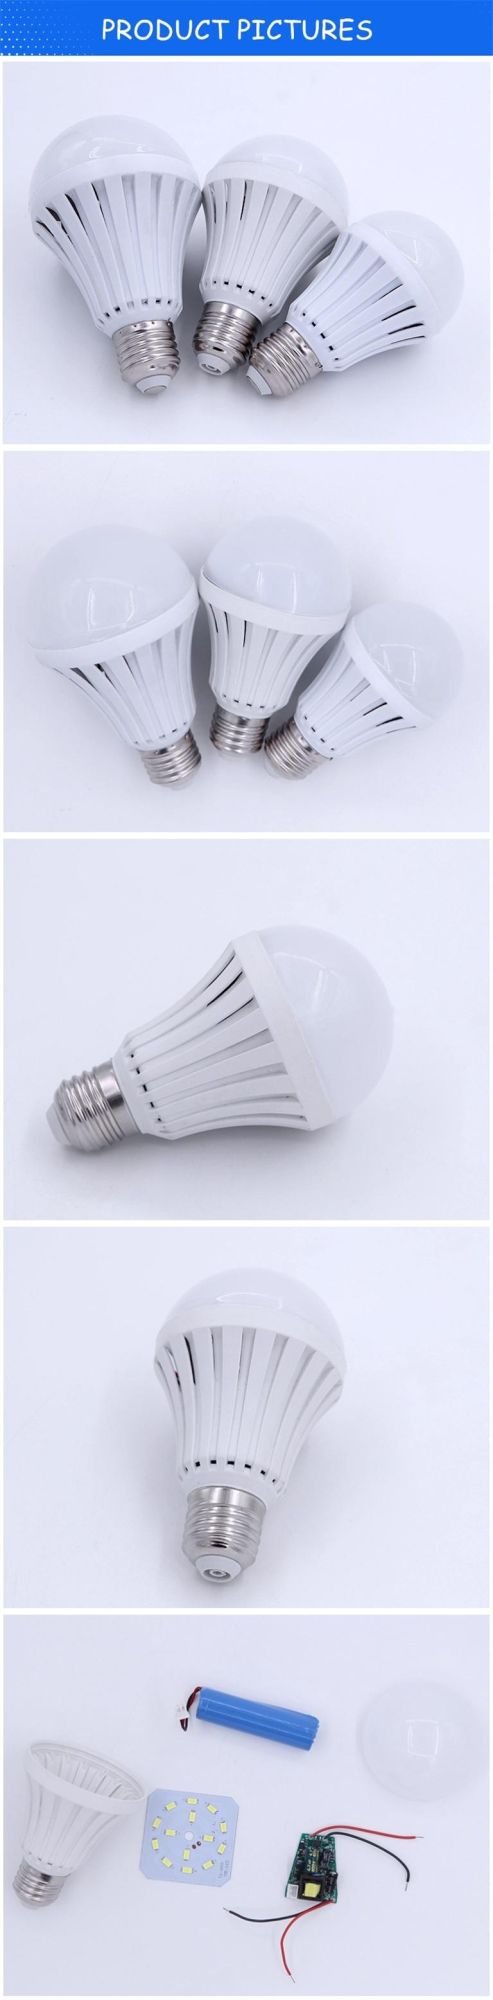 E27 9W Fast Charging LED Emergency Rechargeable Bulb